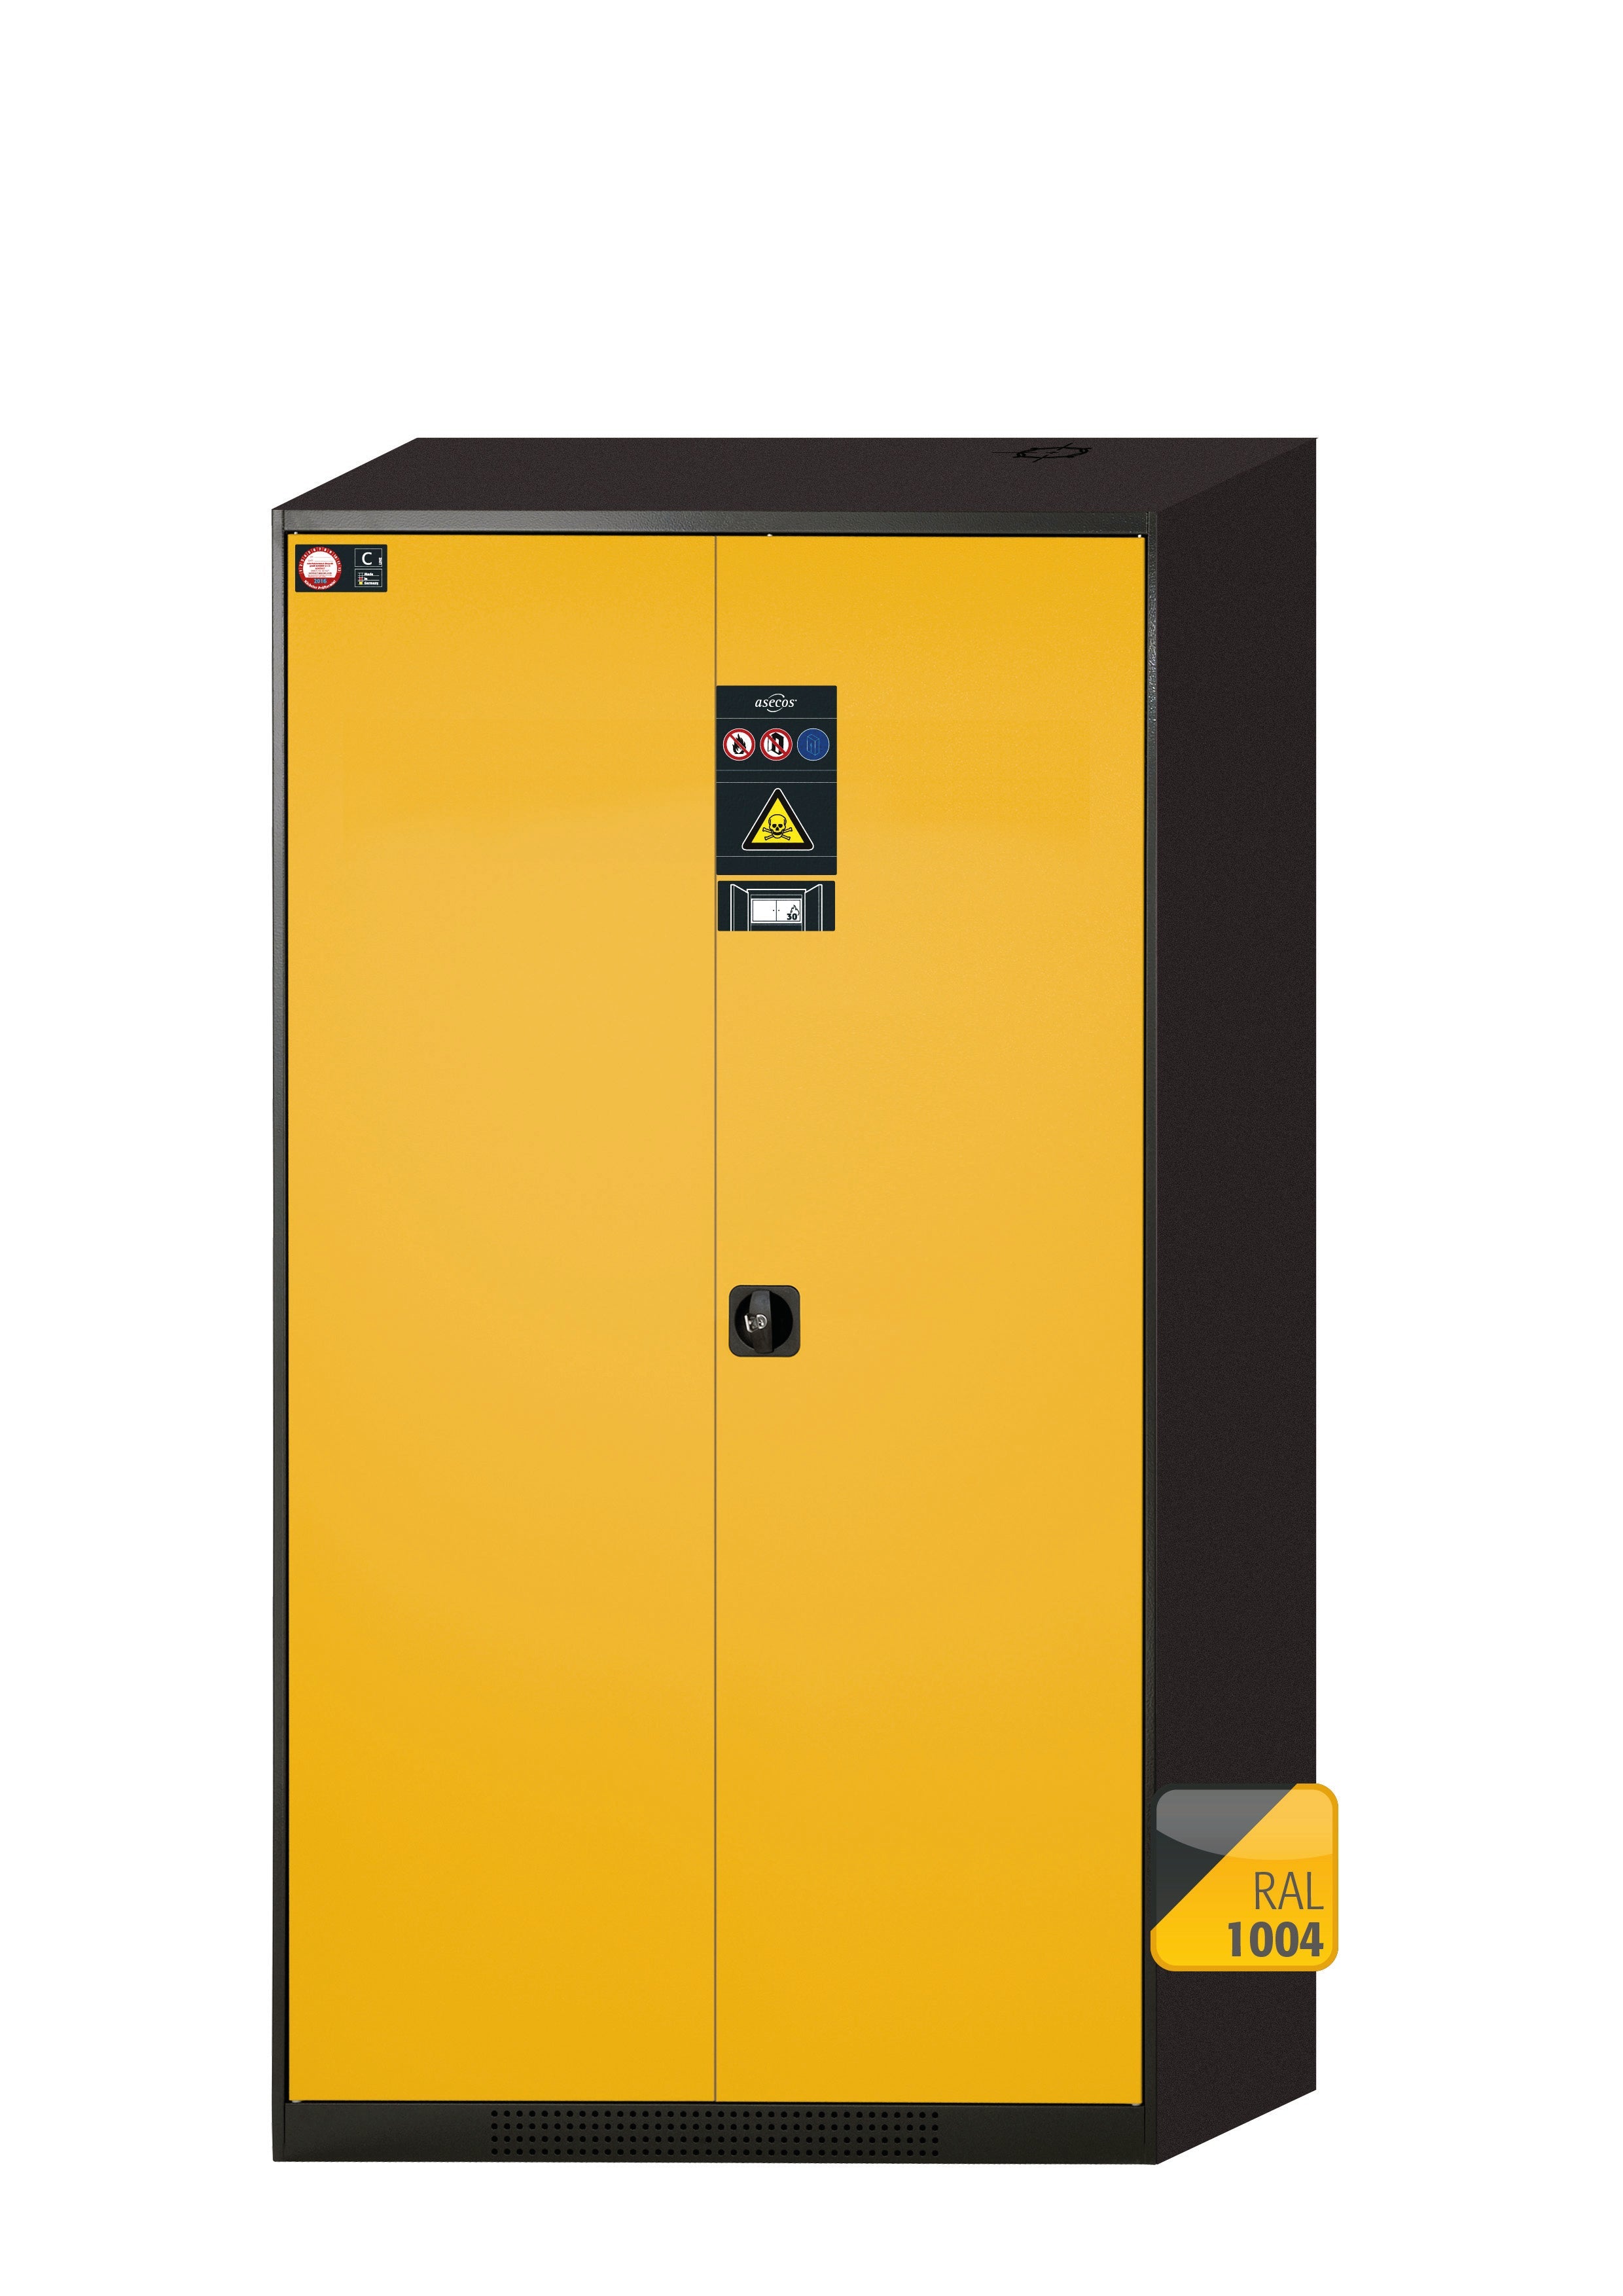 Chemical cabinet with type 30 safety box CS-CLASSIC-F model CS.195.105.F in safety yellow RAL 1004 with 2x standard shelves (sheet steel)